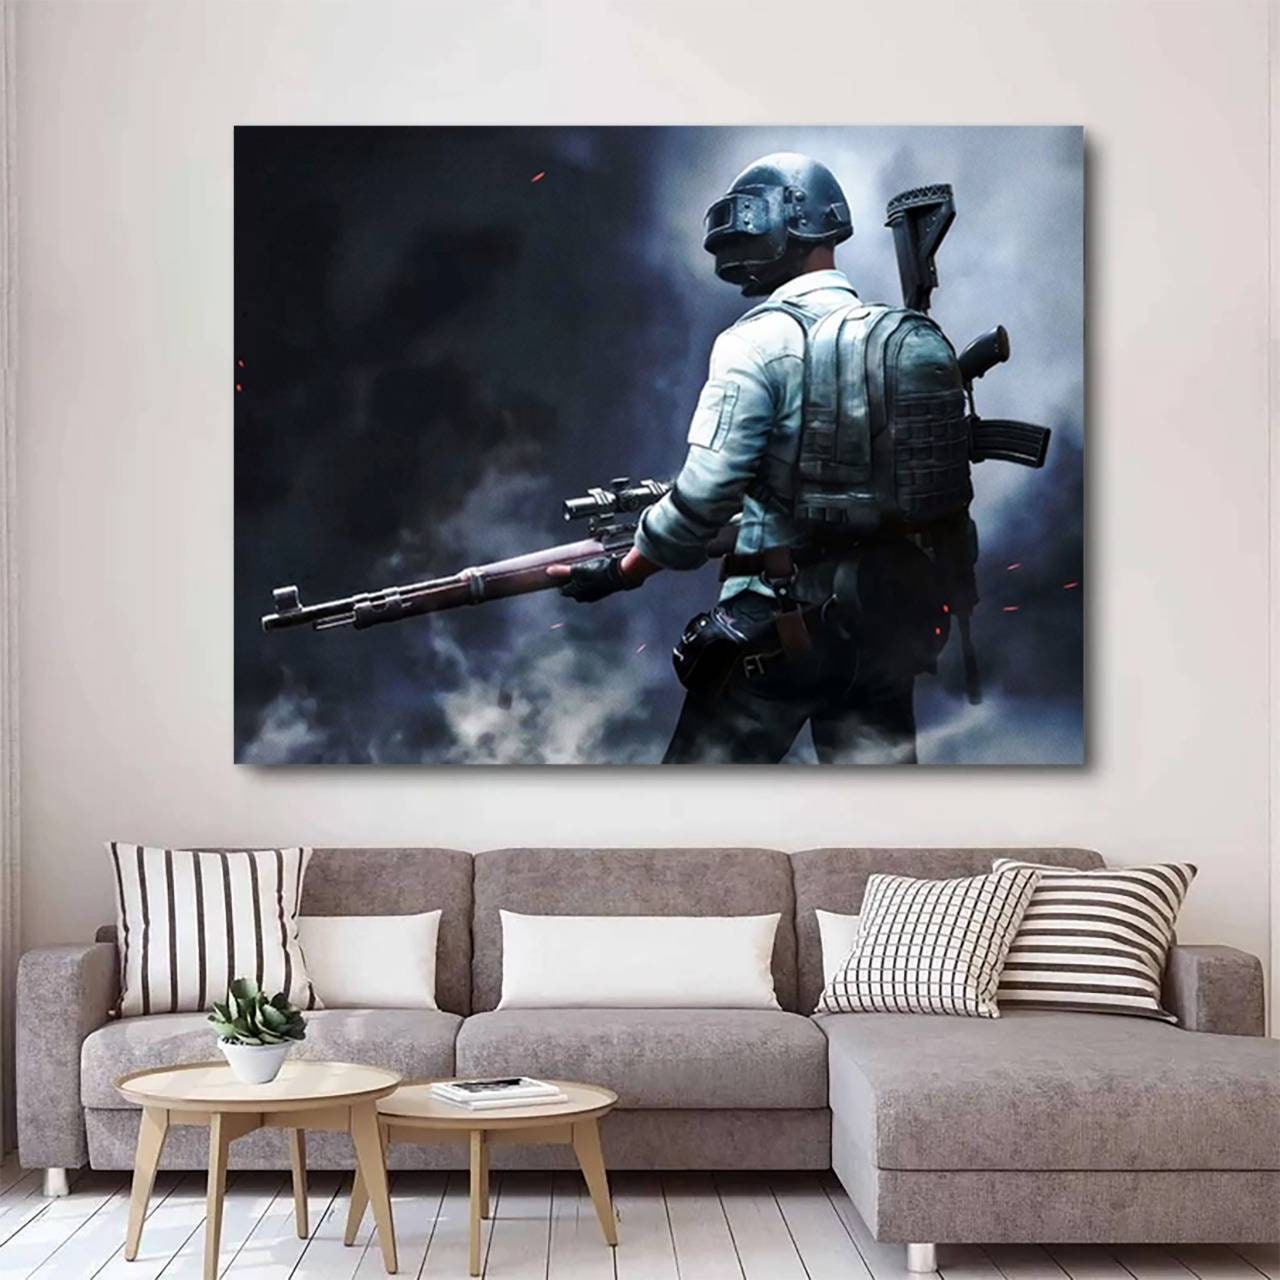 Gaming Zone Poster 